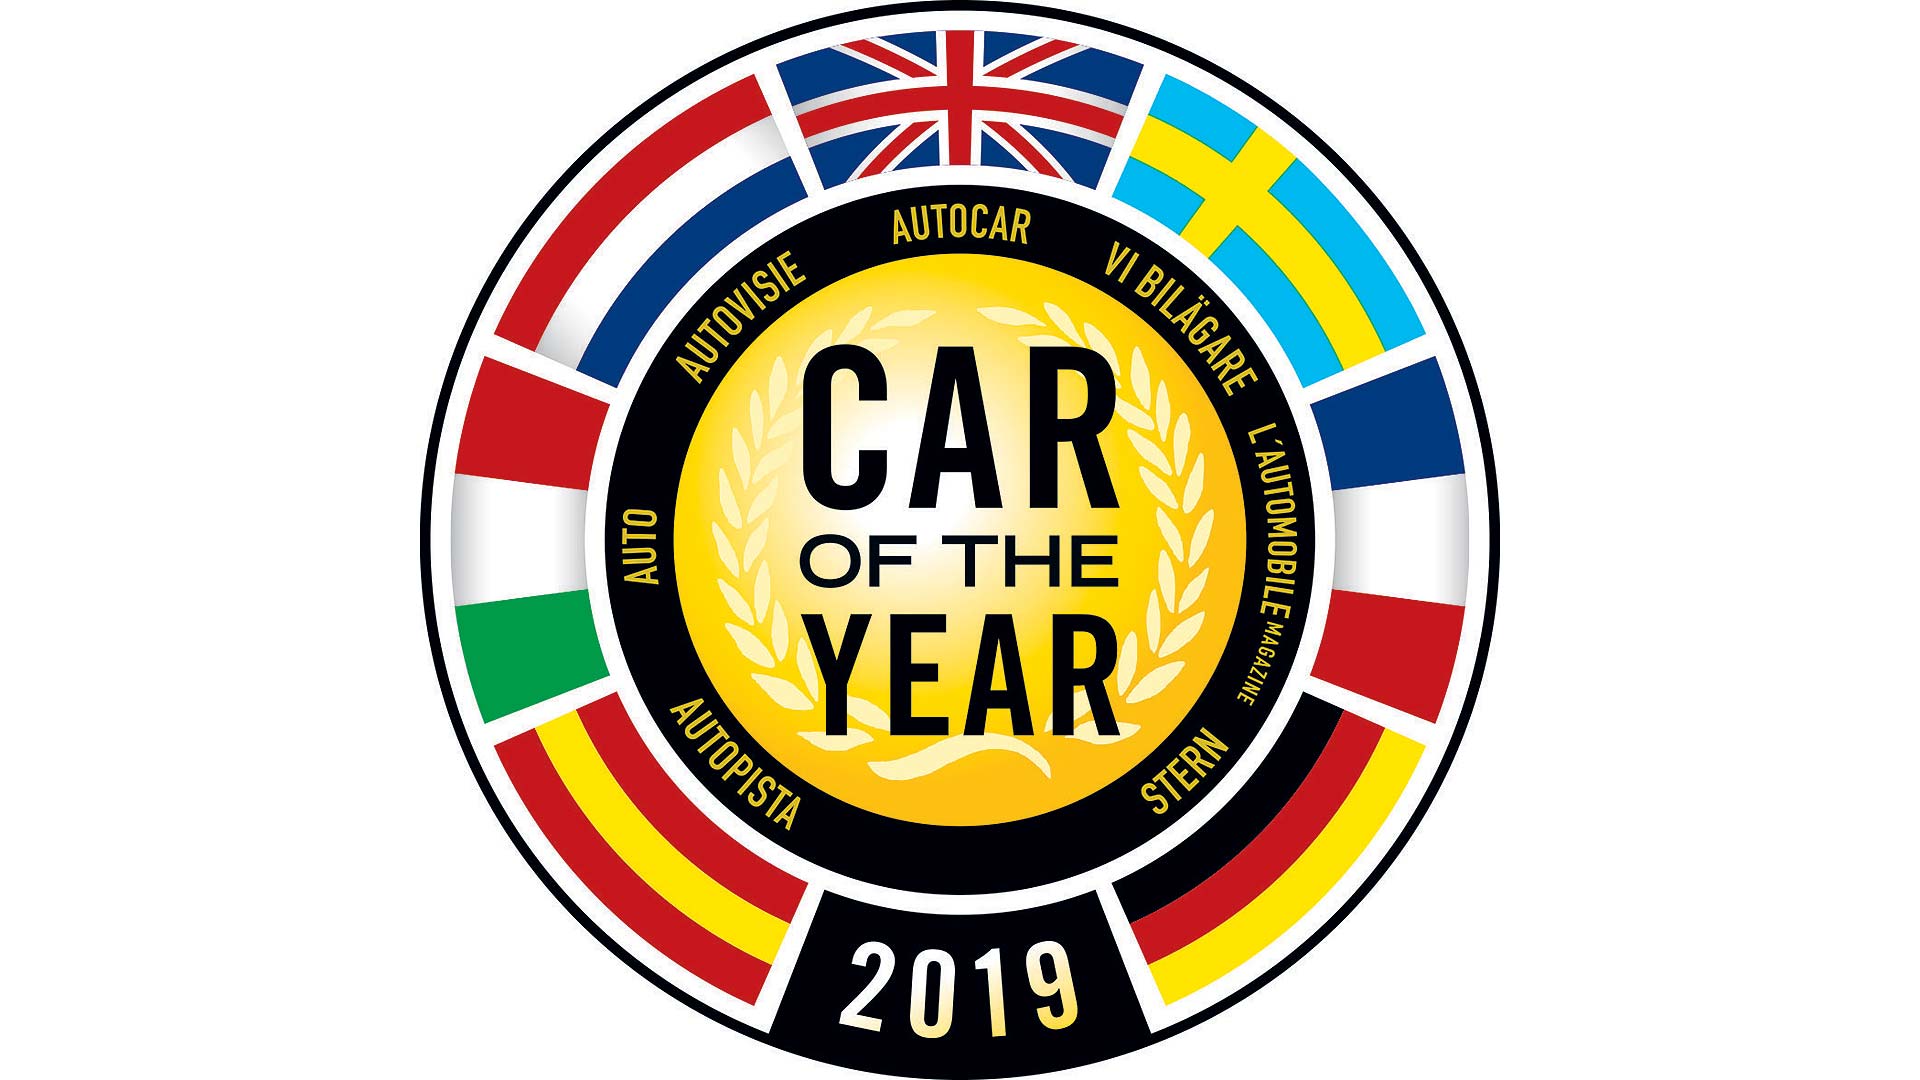 Car of the Year 2019 logo